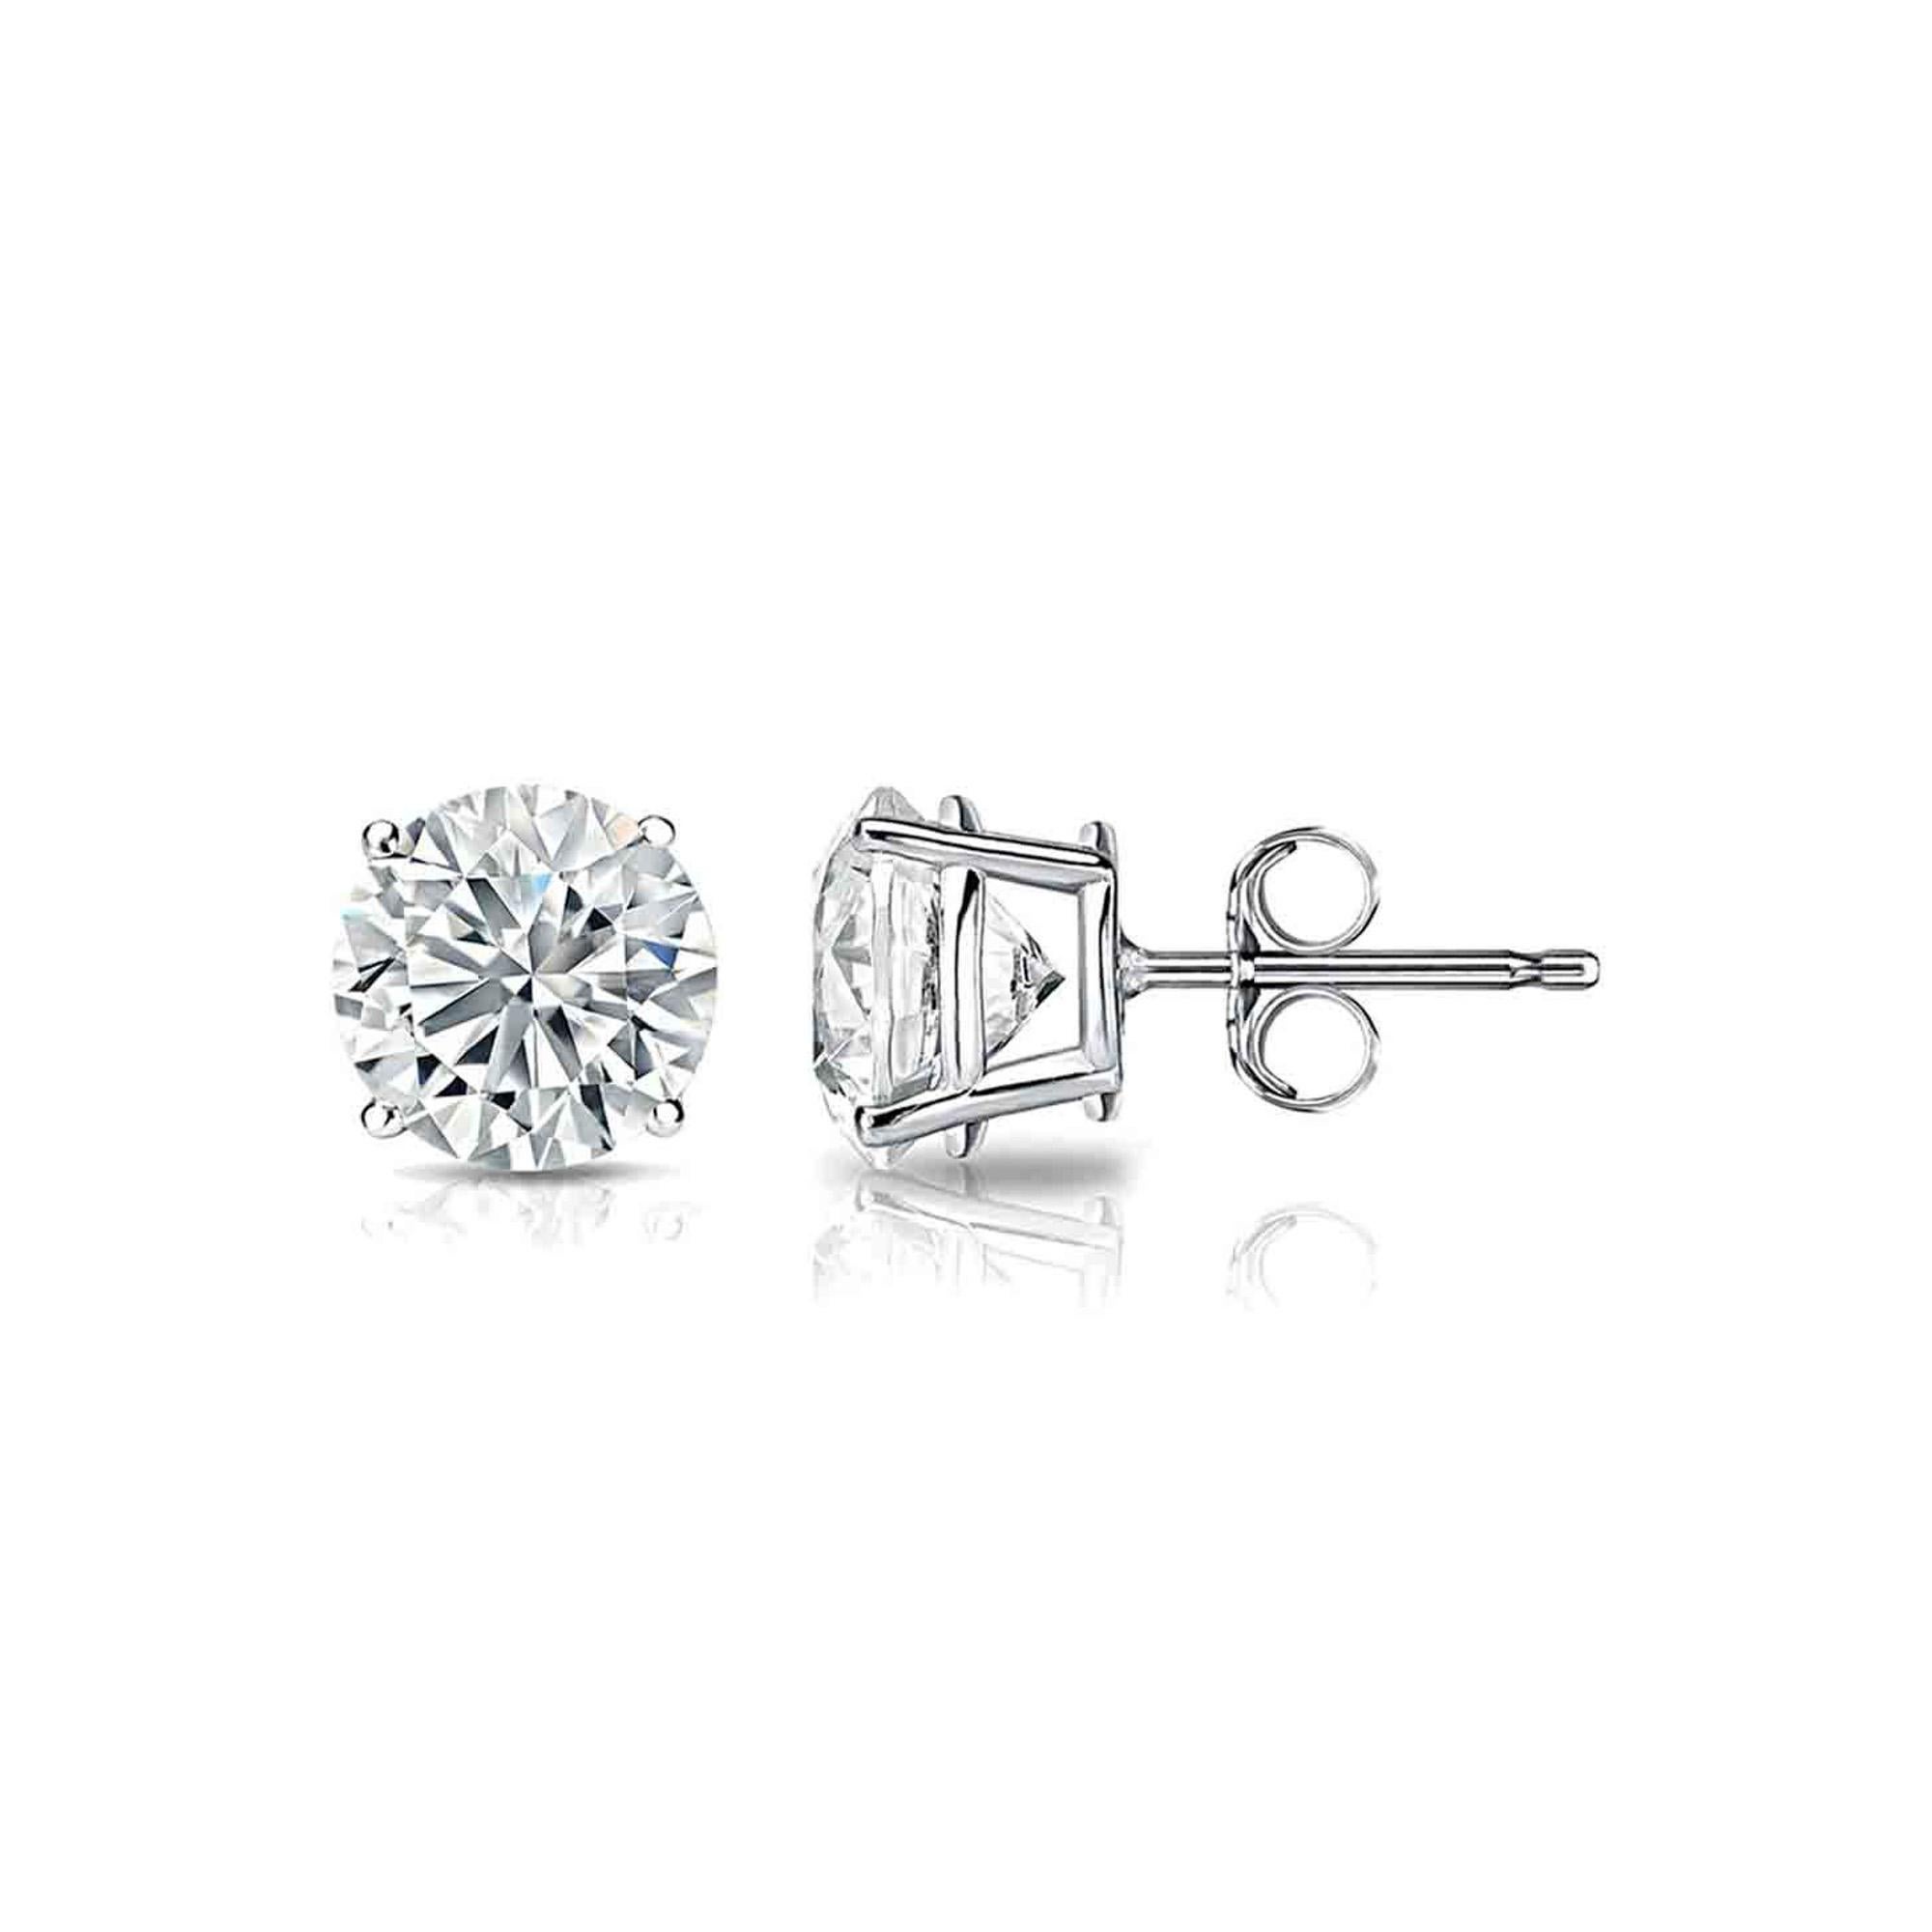 14kt white gold diamond stud earrings containing 2.00 cts tw of round diamonds (FG SI-I)
Diana M. is a leading supplier of top-quality fine jewelry for over 35 years.
Diana M is one-stop shop for all your jewelry shopping, carrying line of diamond